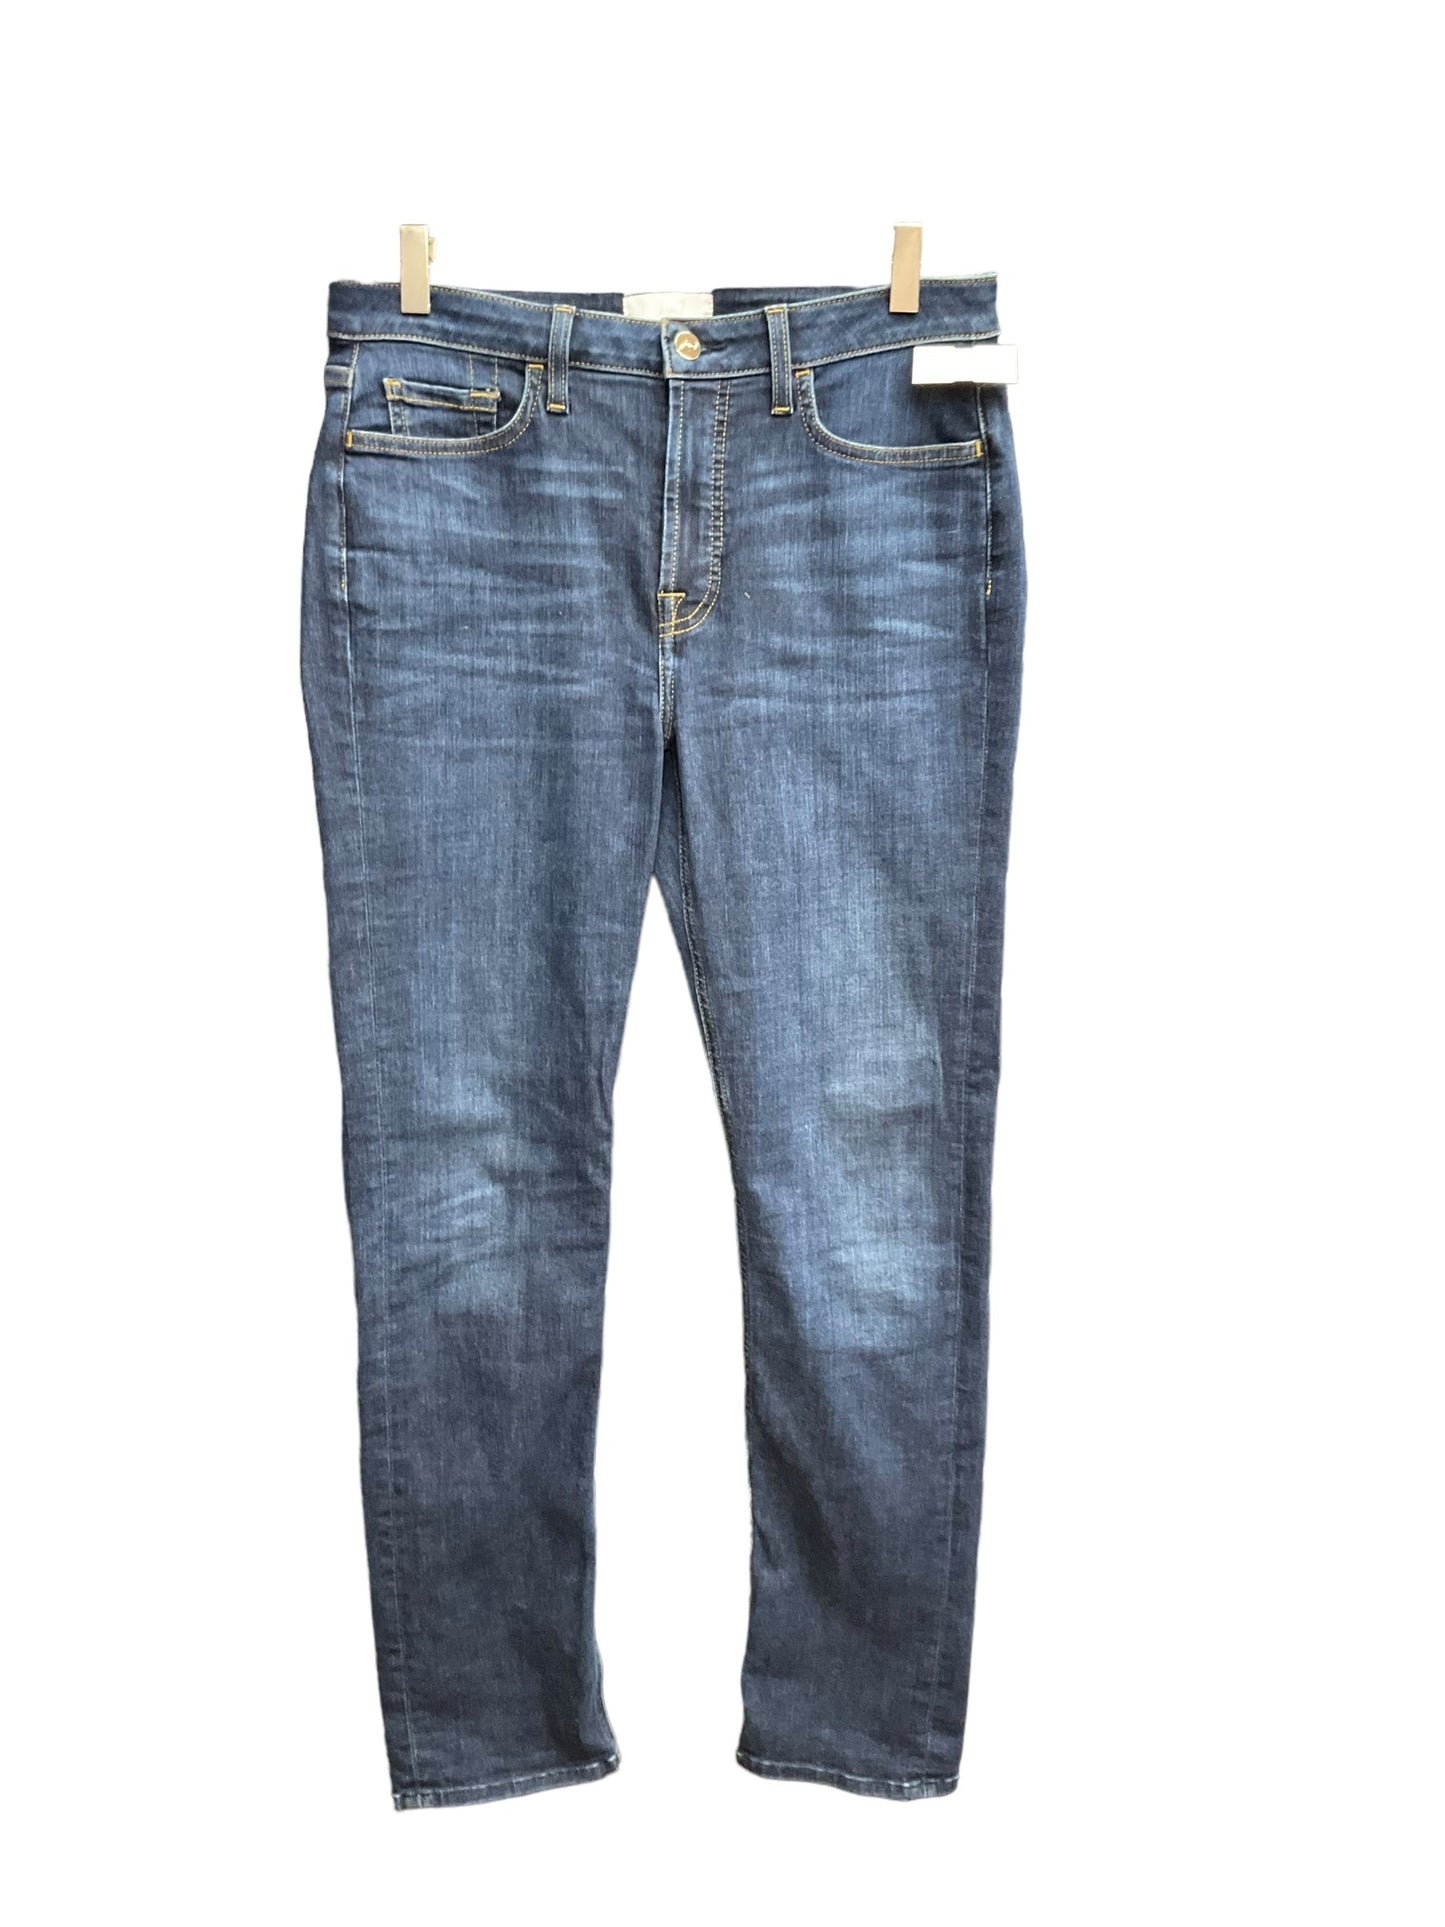 Blue Denim Jeans Straight 7 For All Mankind, Size 8